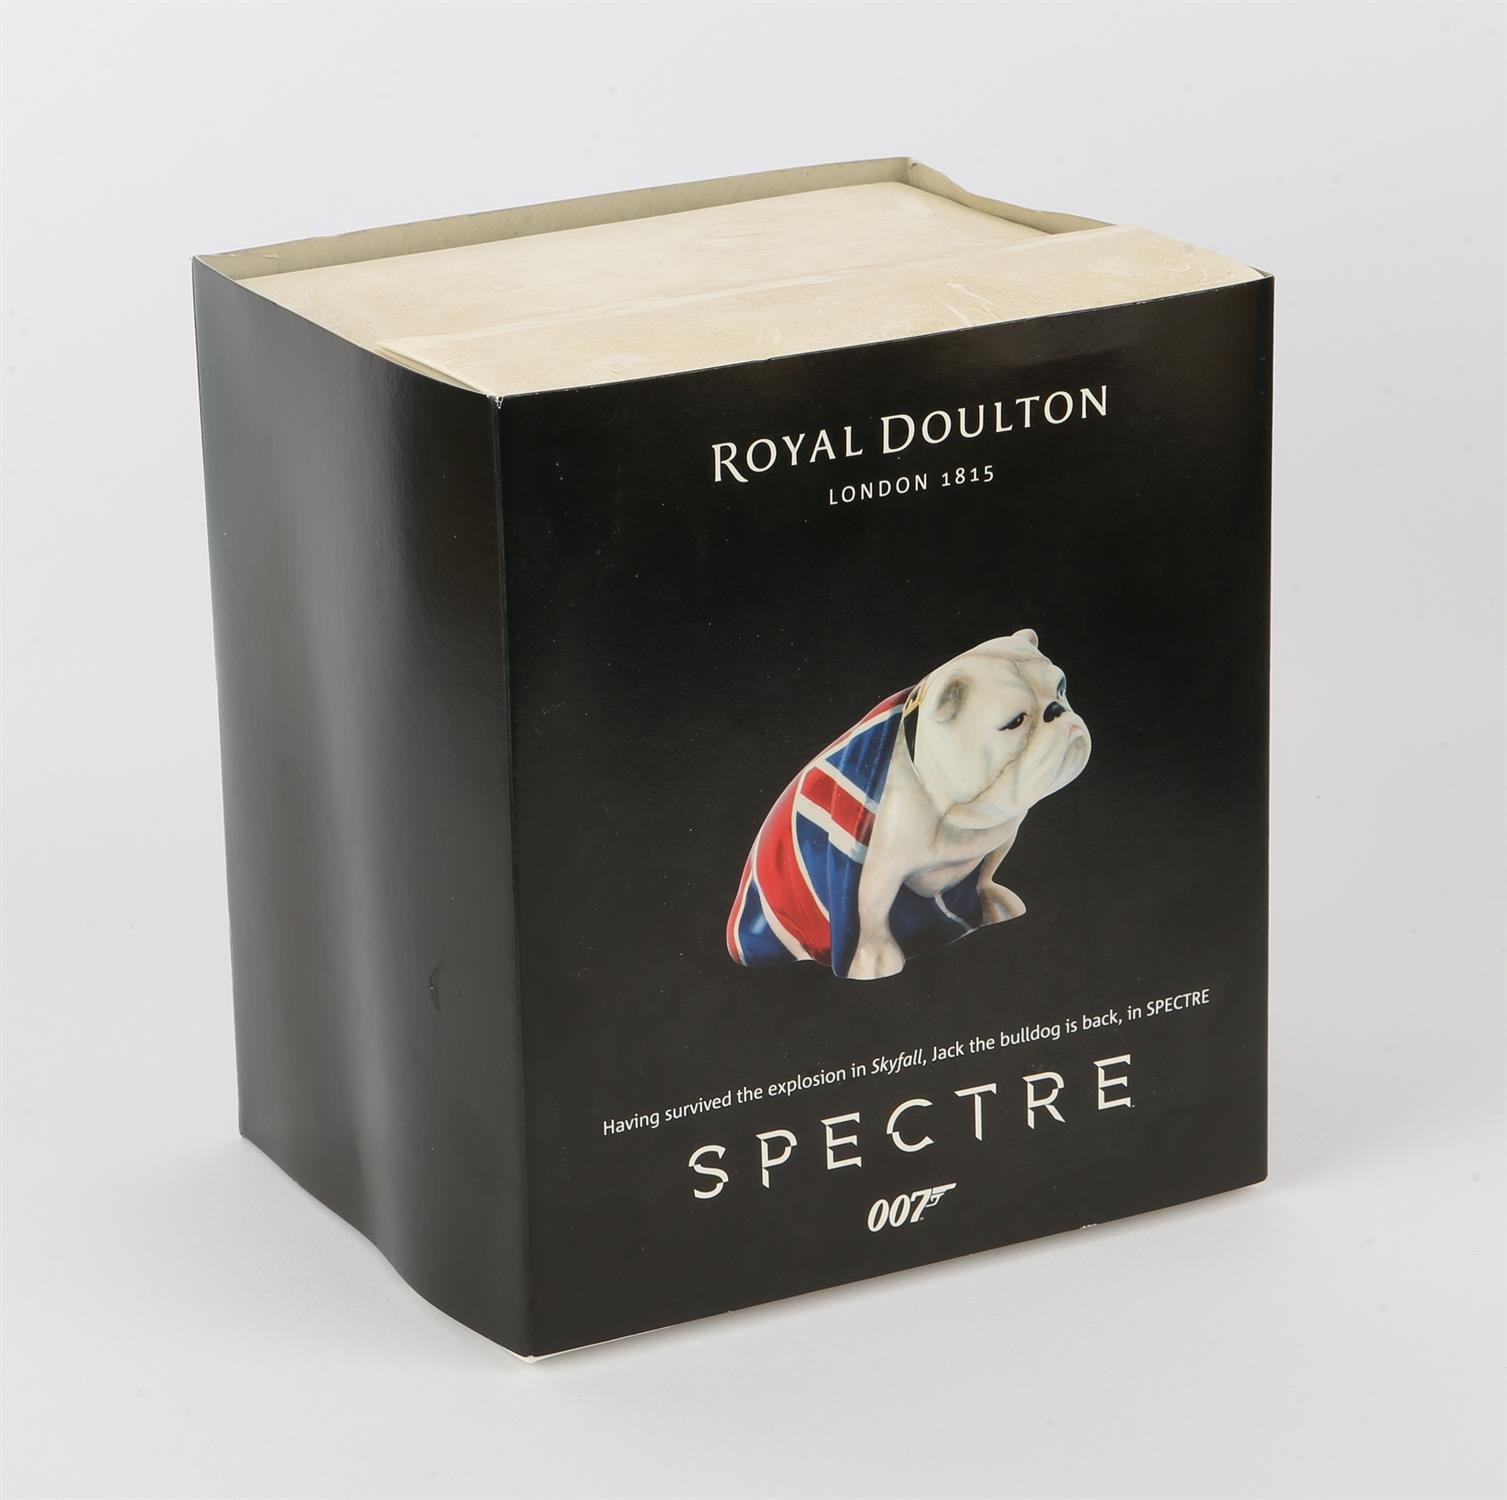 James Bond 007 - Royal Doulton Spectre 'Jack' china Bulldog figure, issued in 2015, - Image 4 of 4